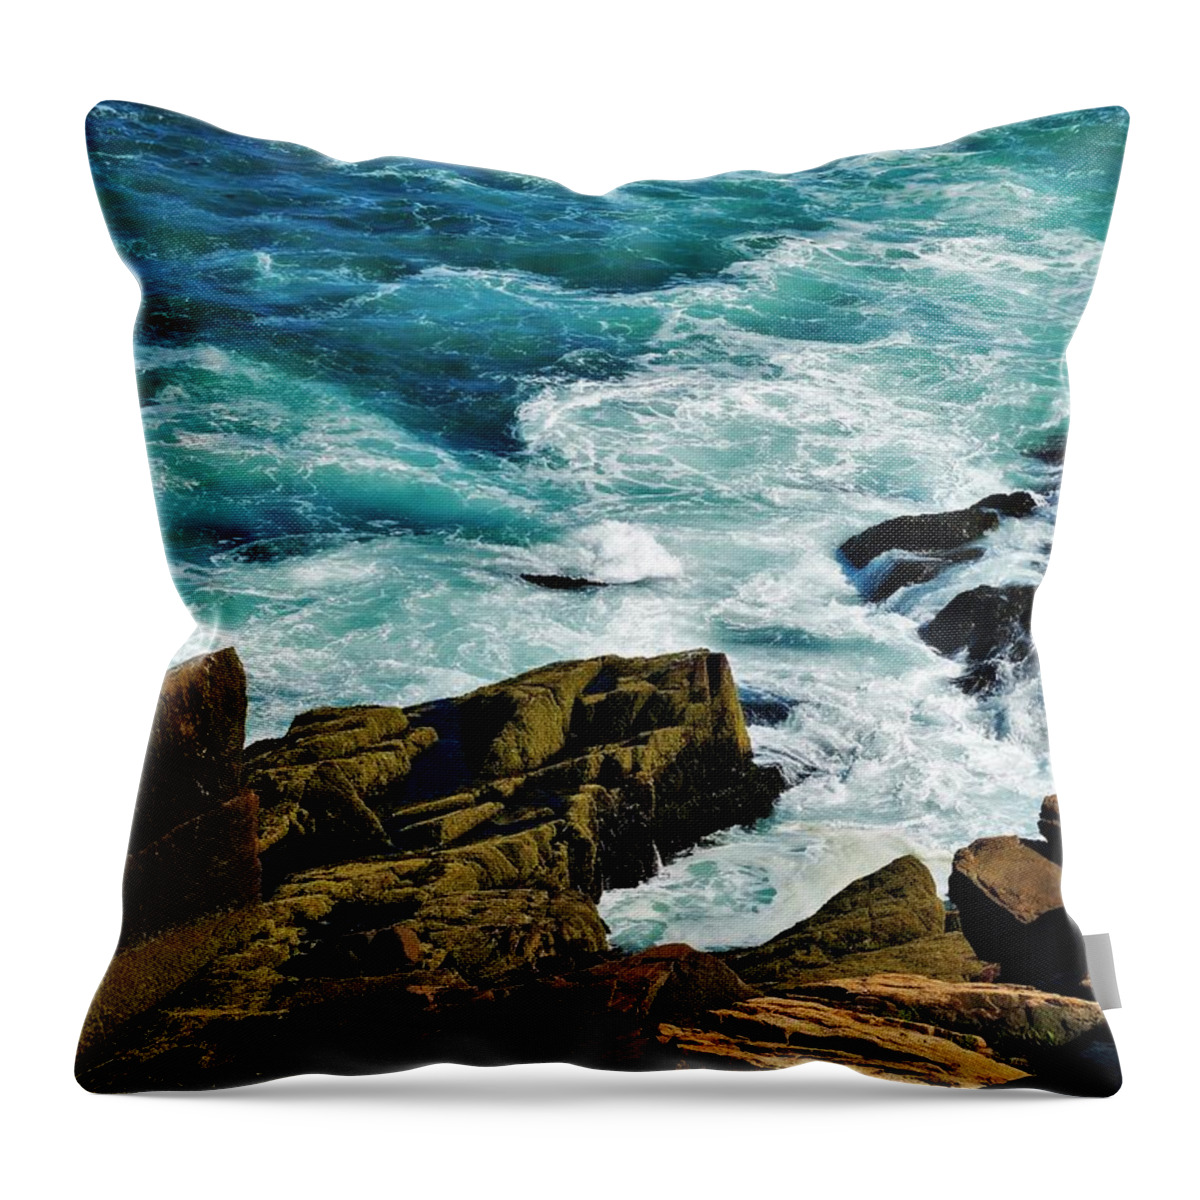 Rockport Throw Pillow featuring the photograph Wild Shore by Lisa Dunn